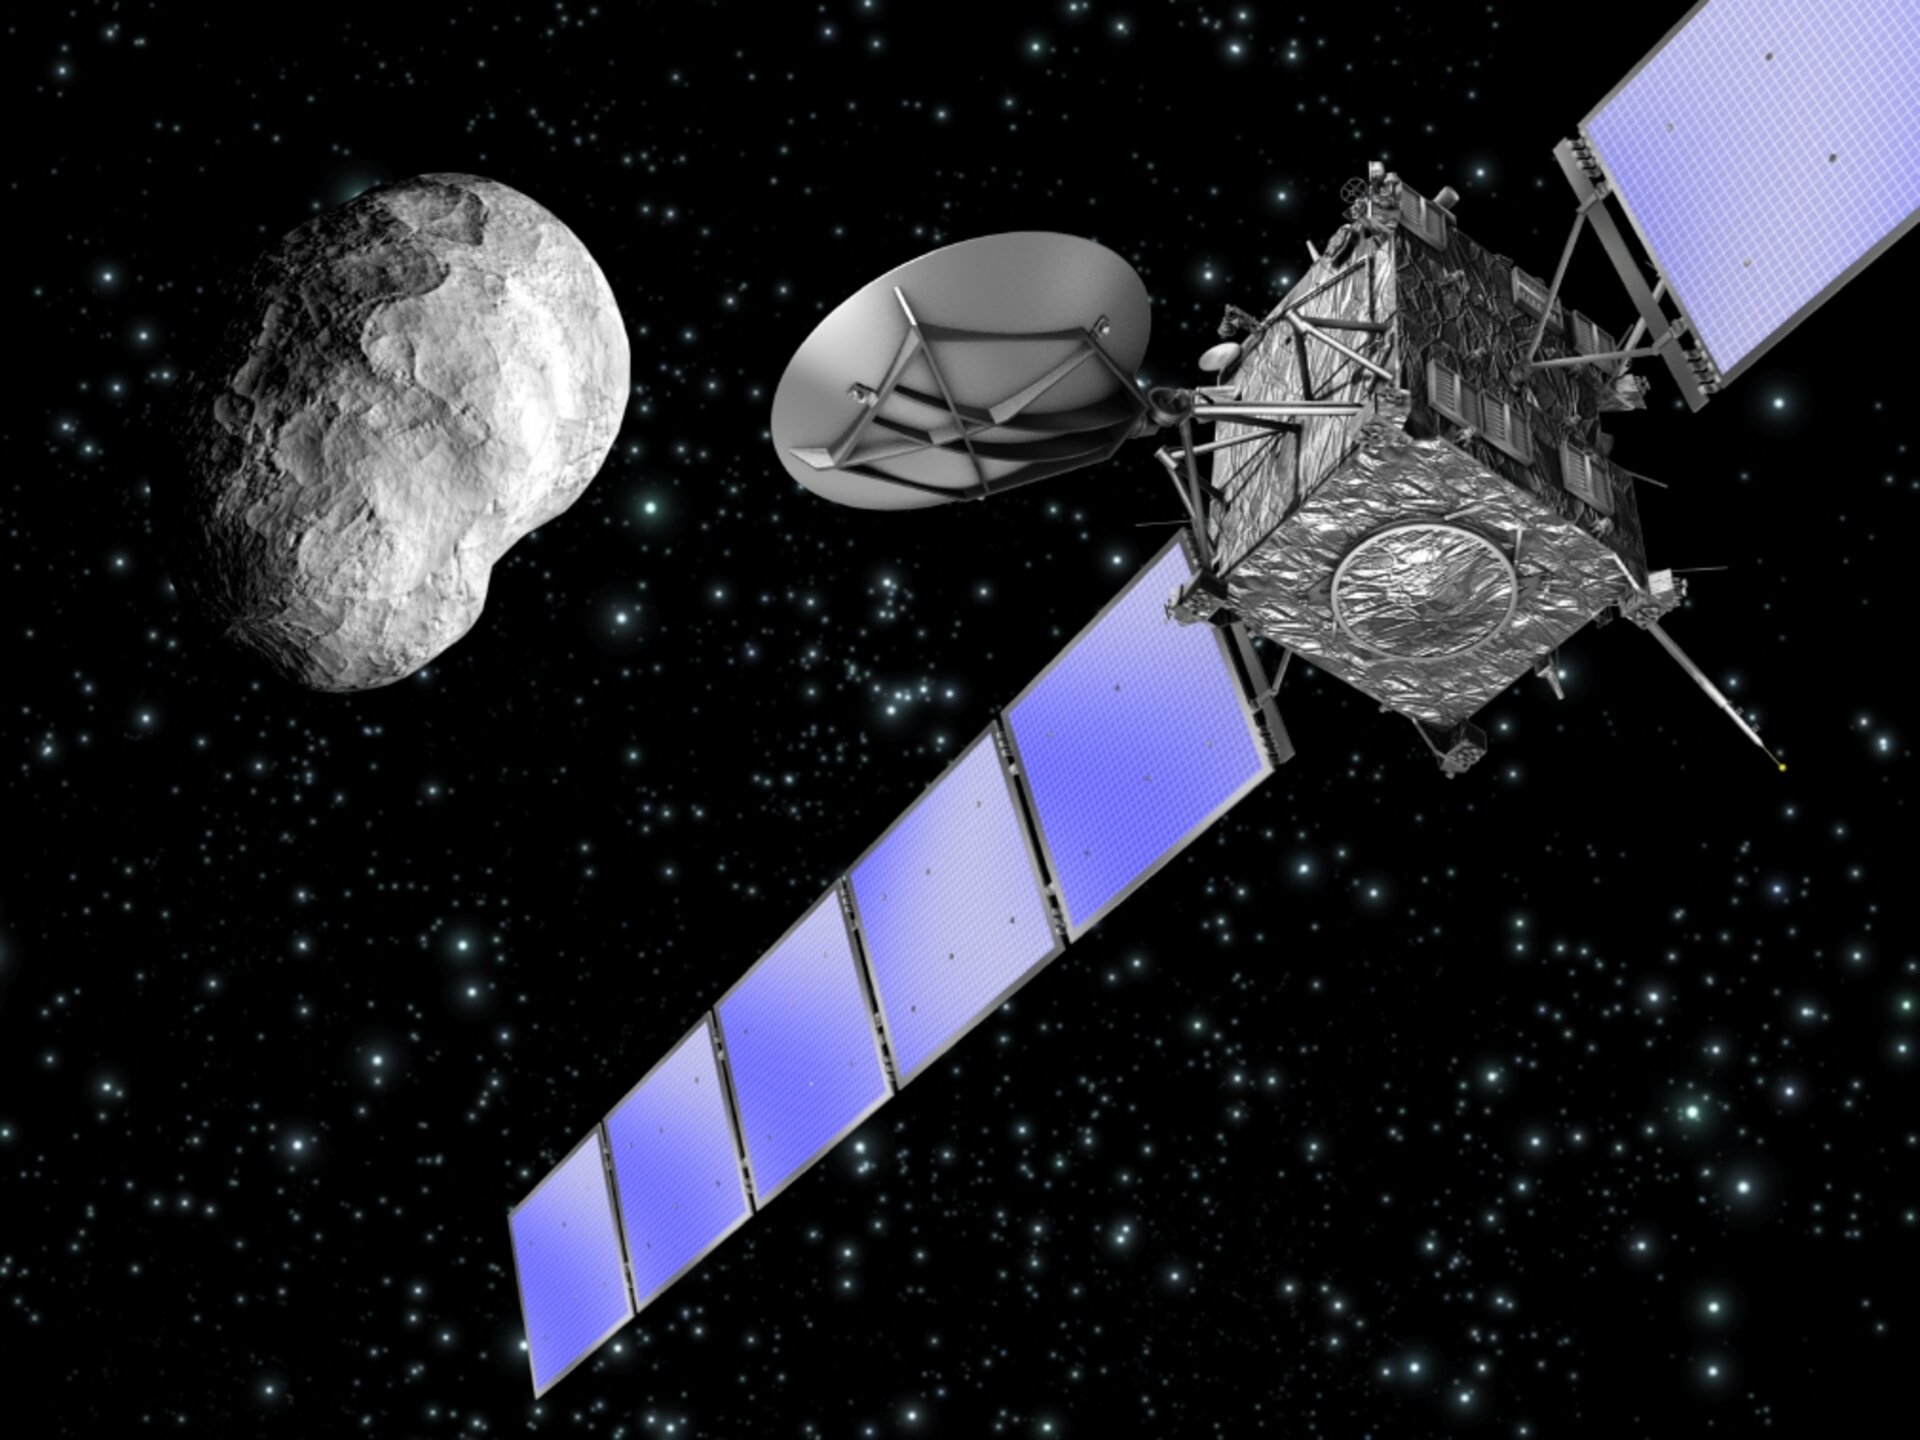 Artist's impression of Rosetta asteroid fly-by